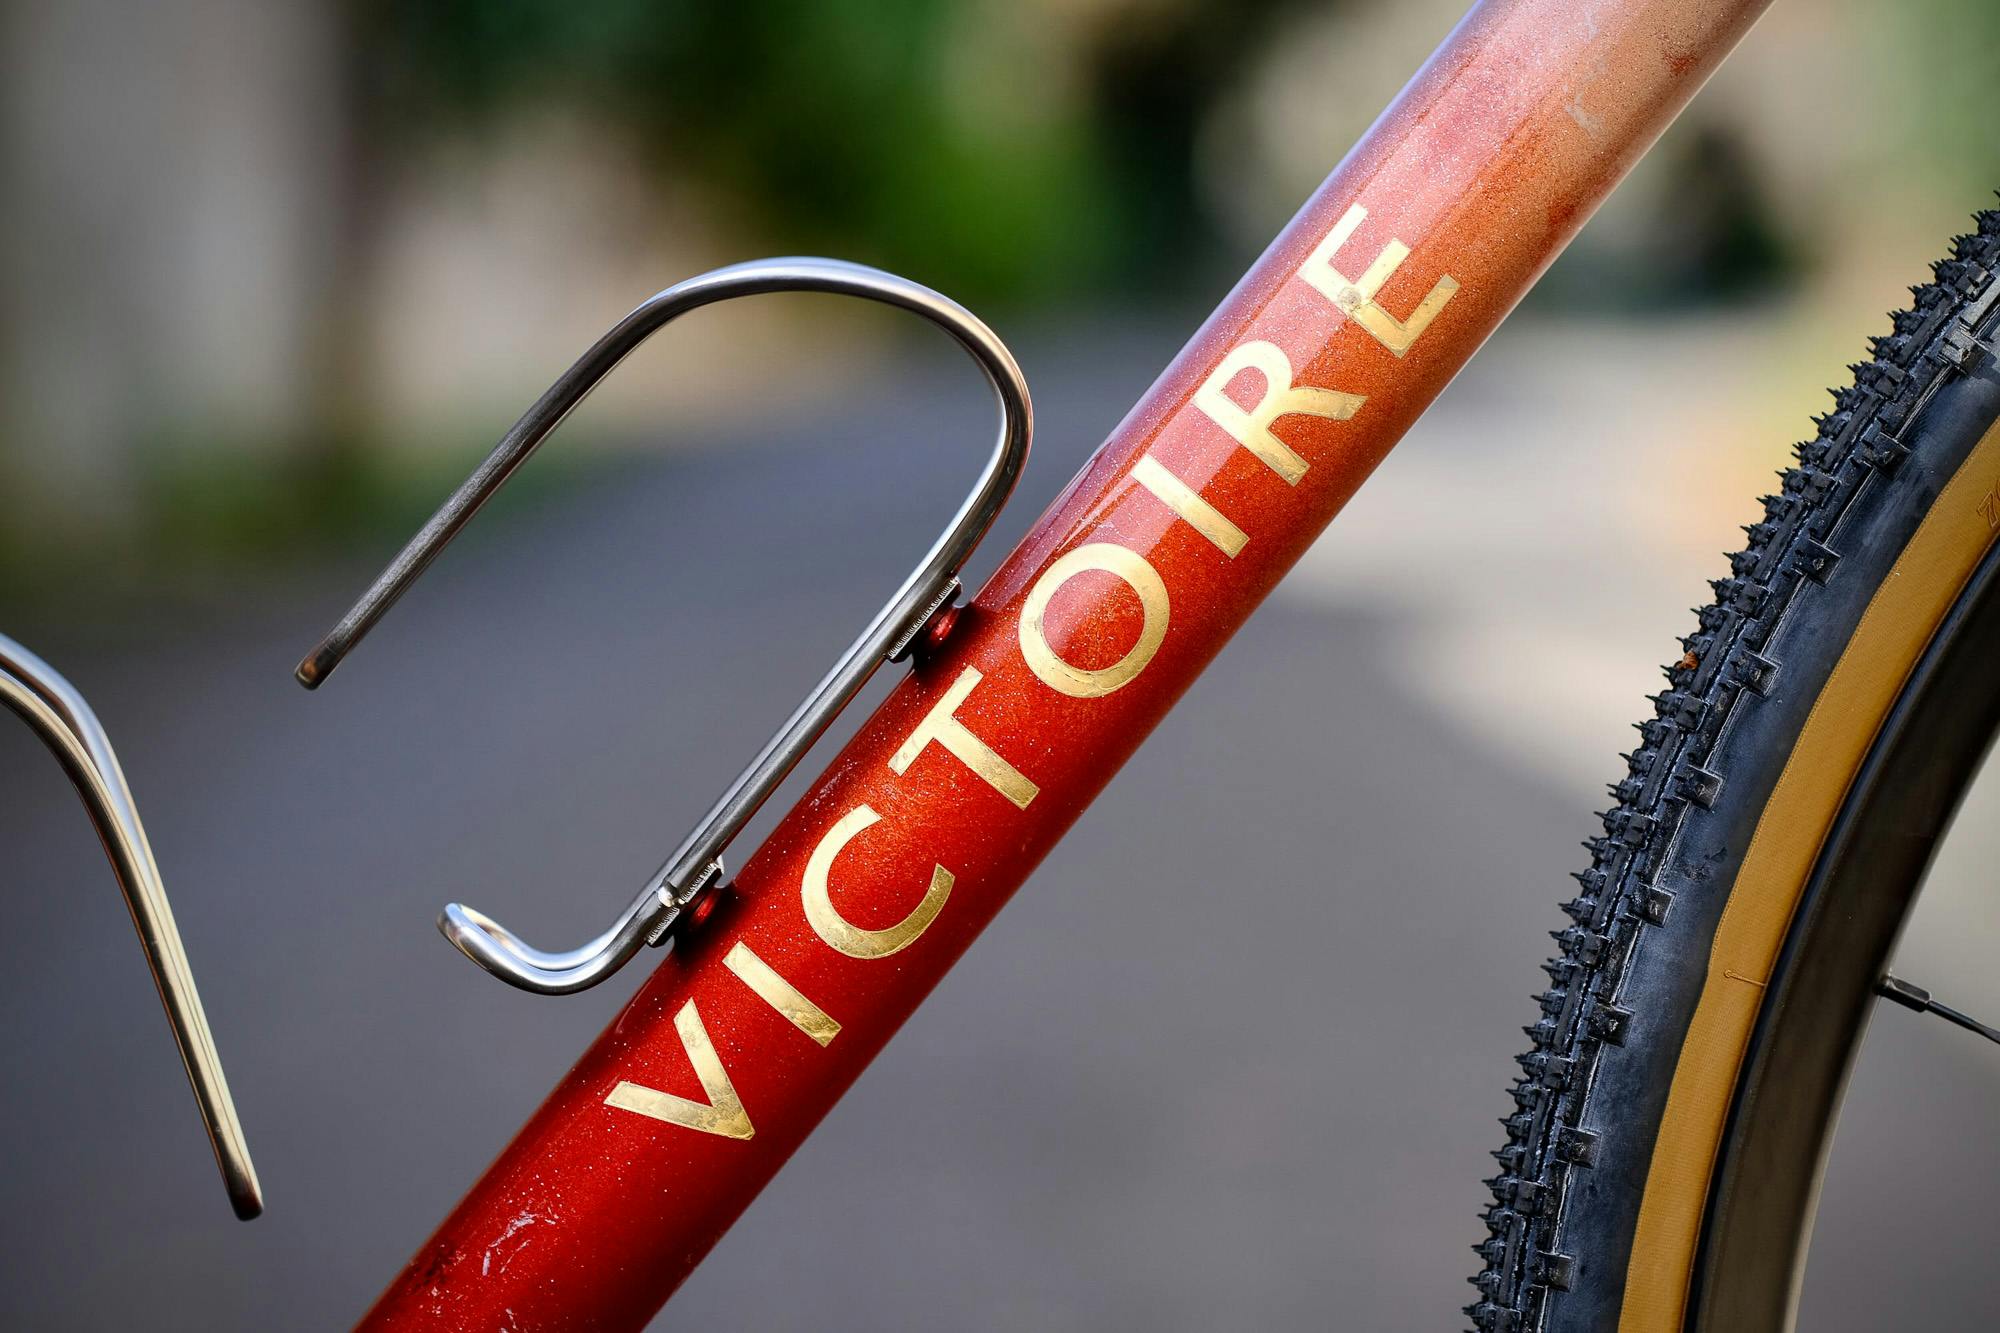 The Victoire logo on a downtube.